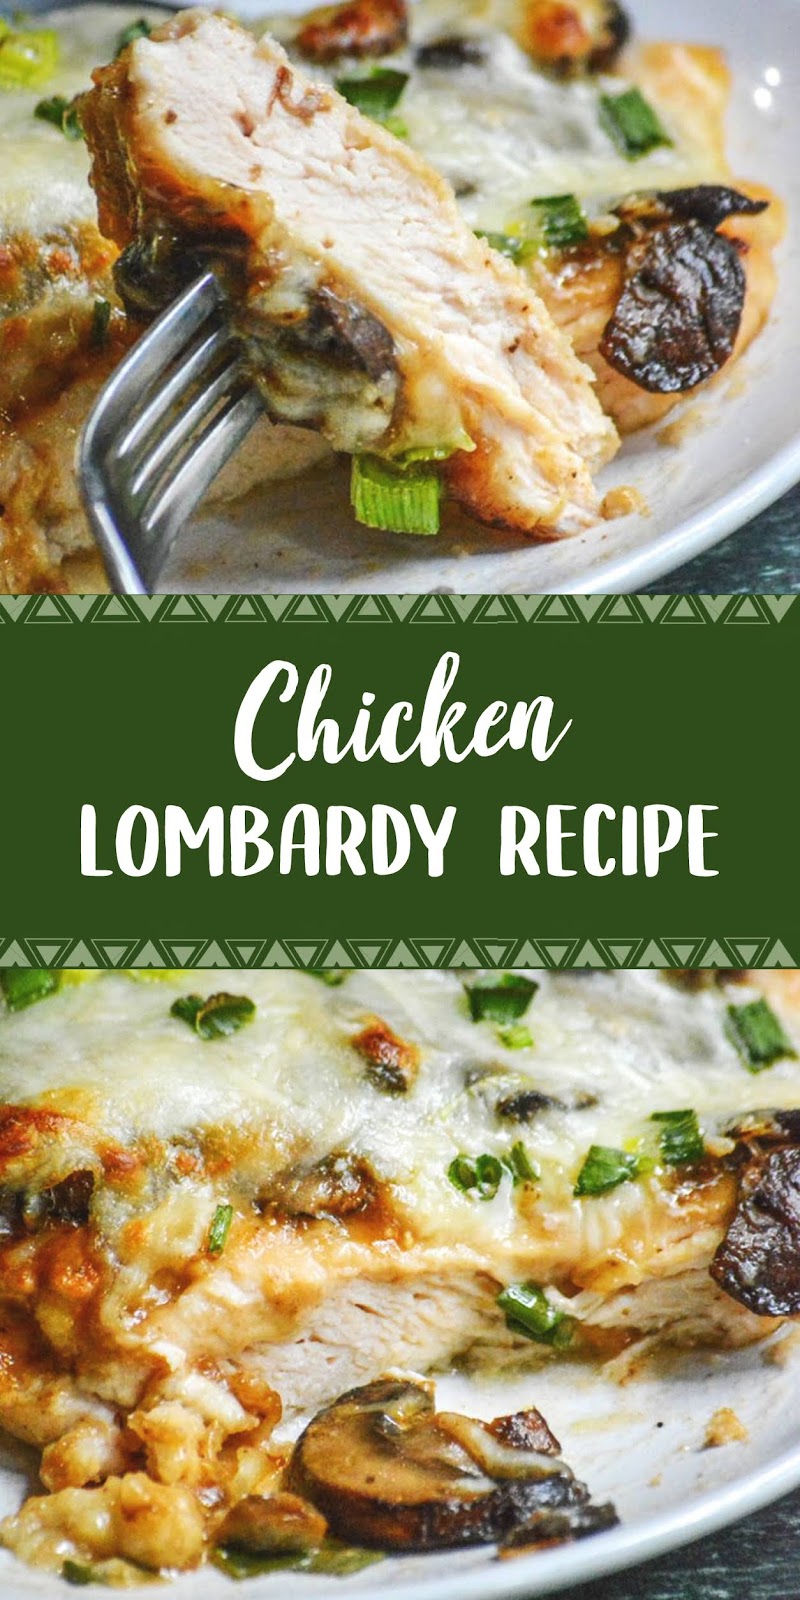 CHICKEN LOMBARDY RECIPE - HEALTH and WELLNESS